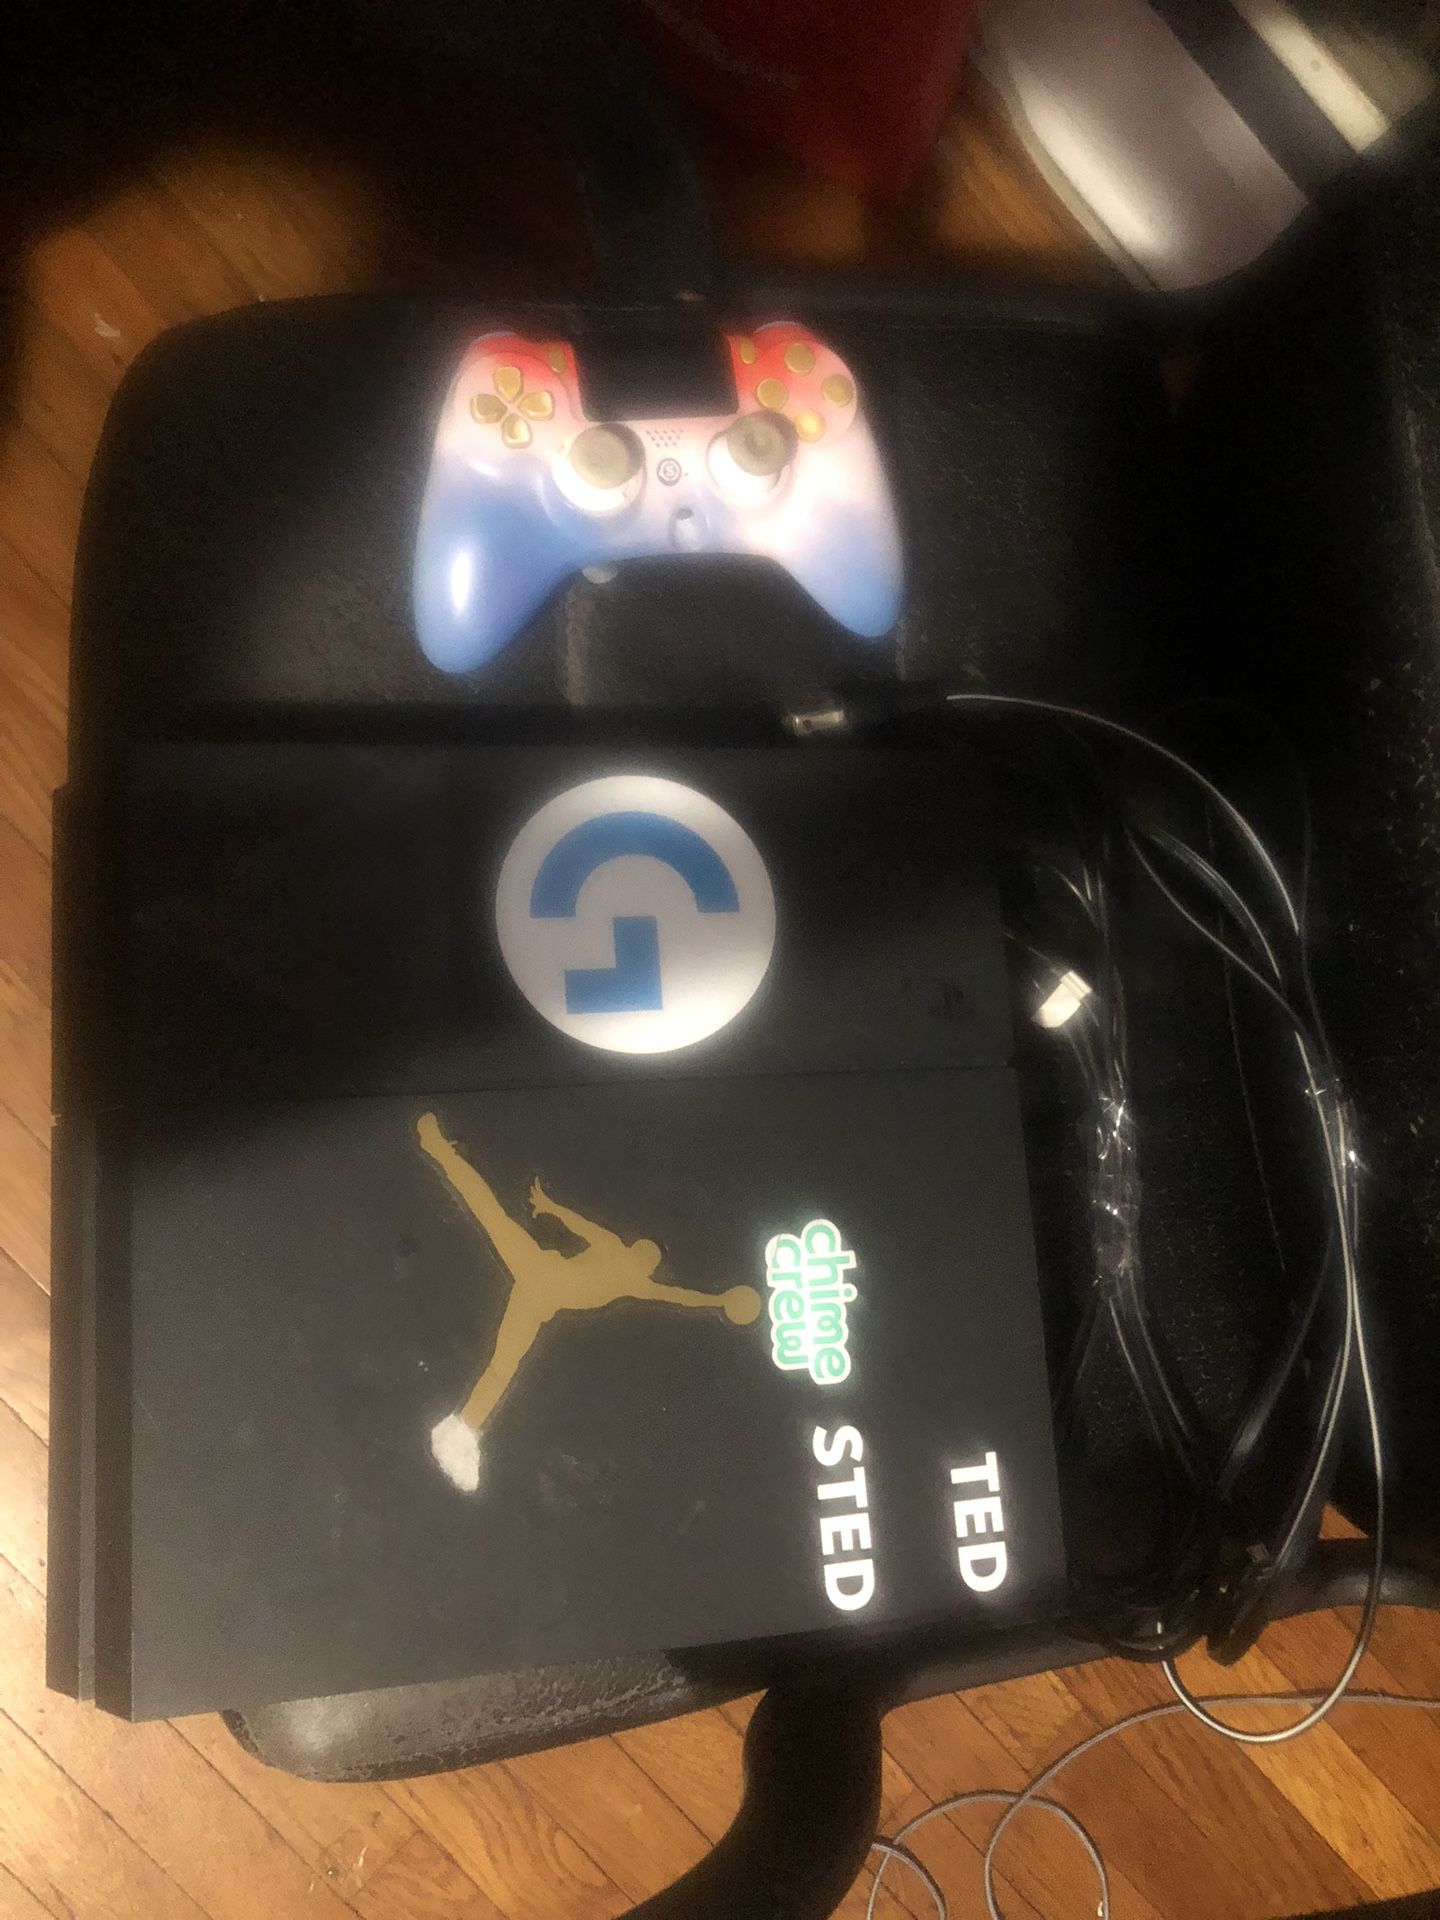 PS4 In Good Condition For A Good Price